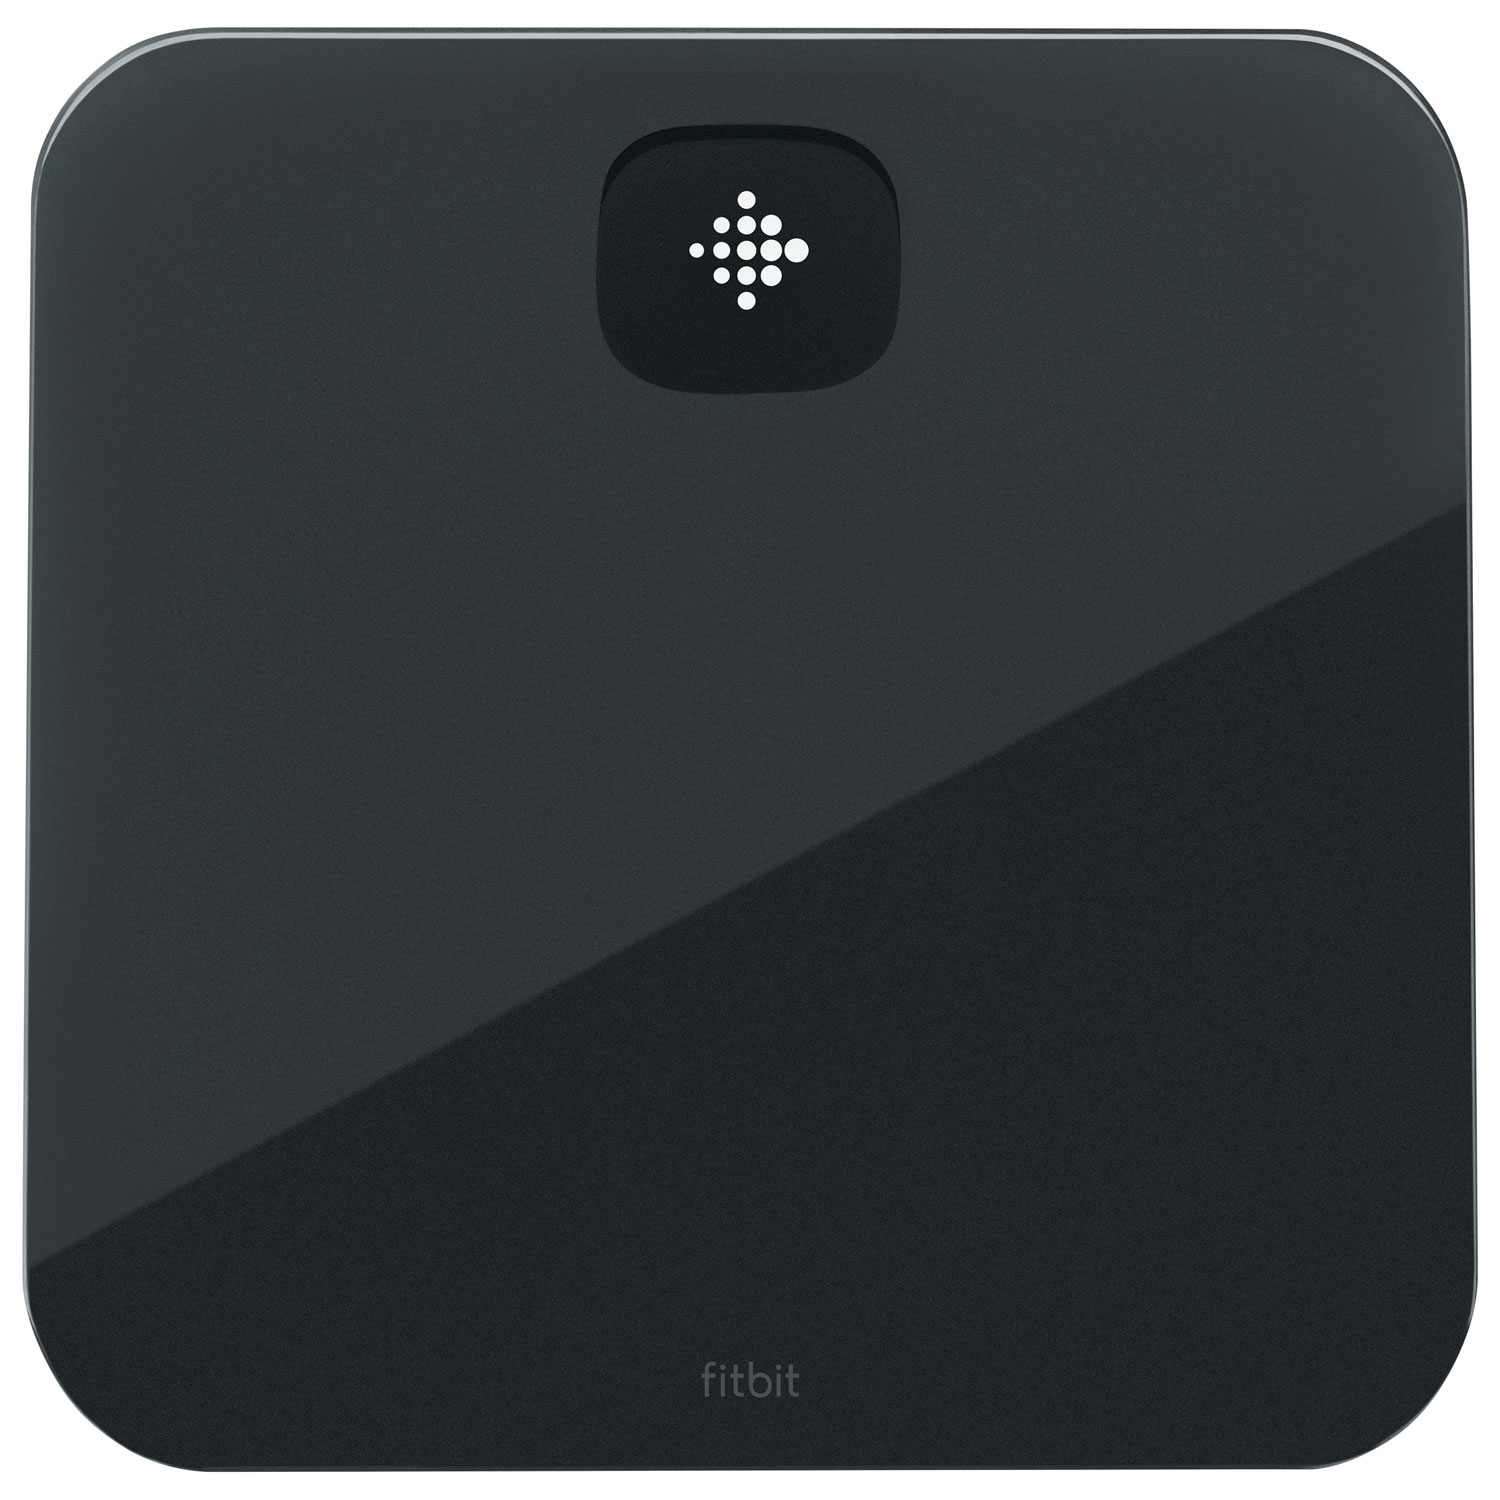 smart scale that works with fitbit